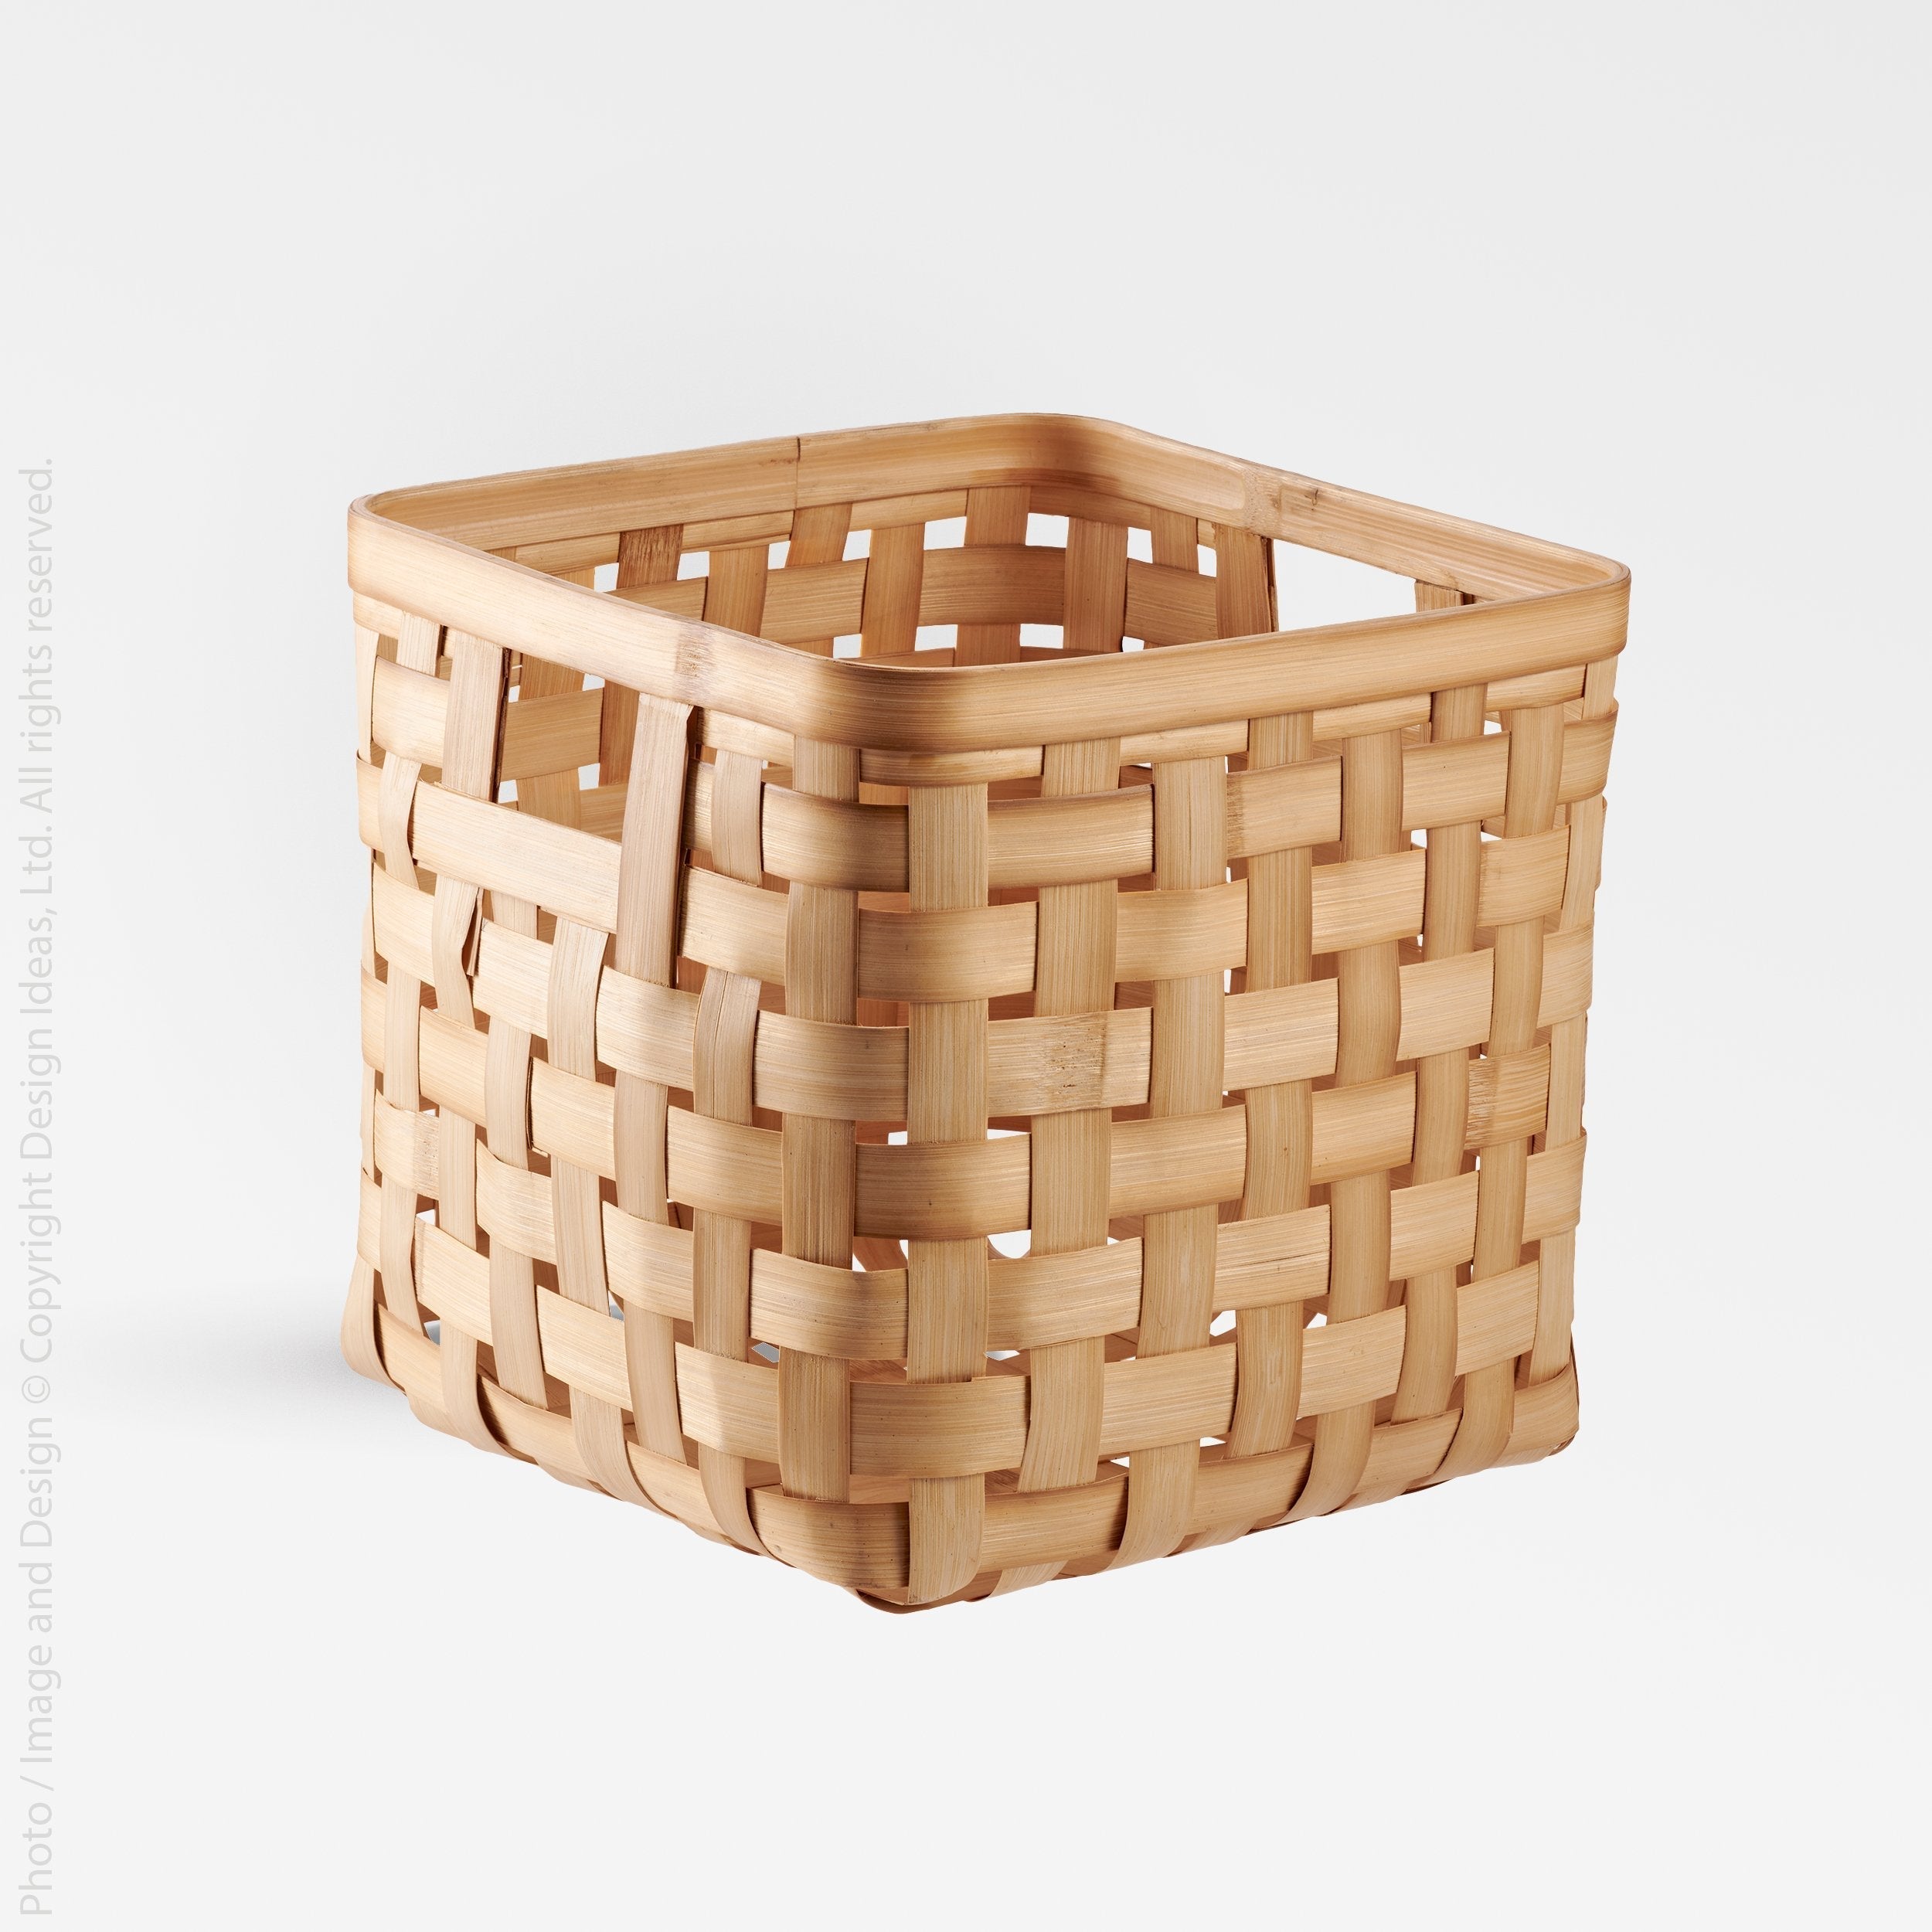 Bahmi™ storage cube (13x13x13in) - Natural | Image 1 | Premium Bin from the Bahmi collection | made with Bamboo for long lasting use | texxture